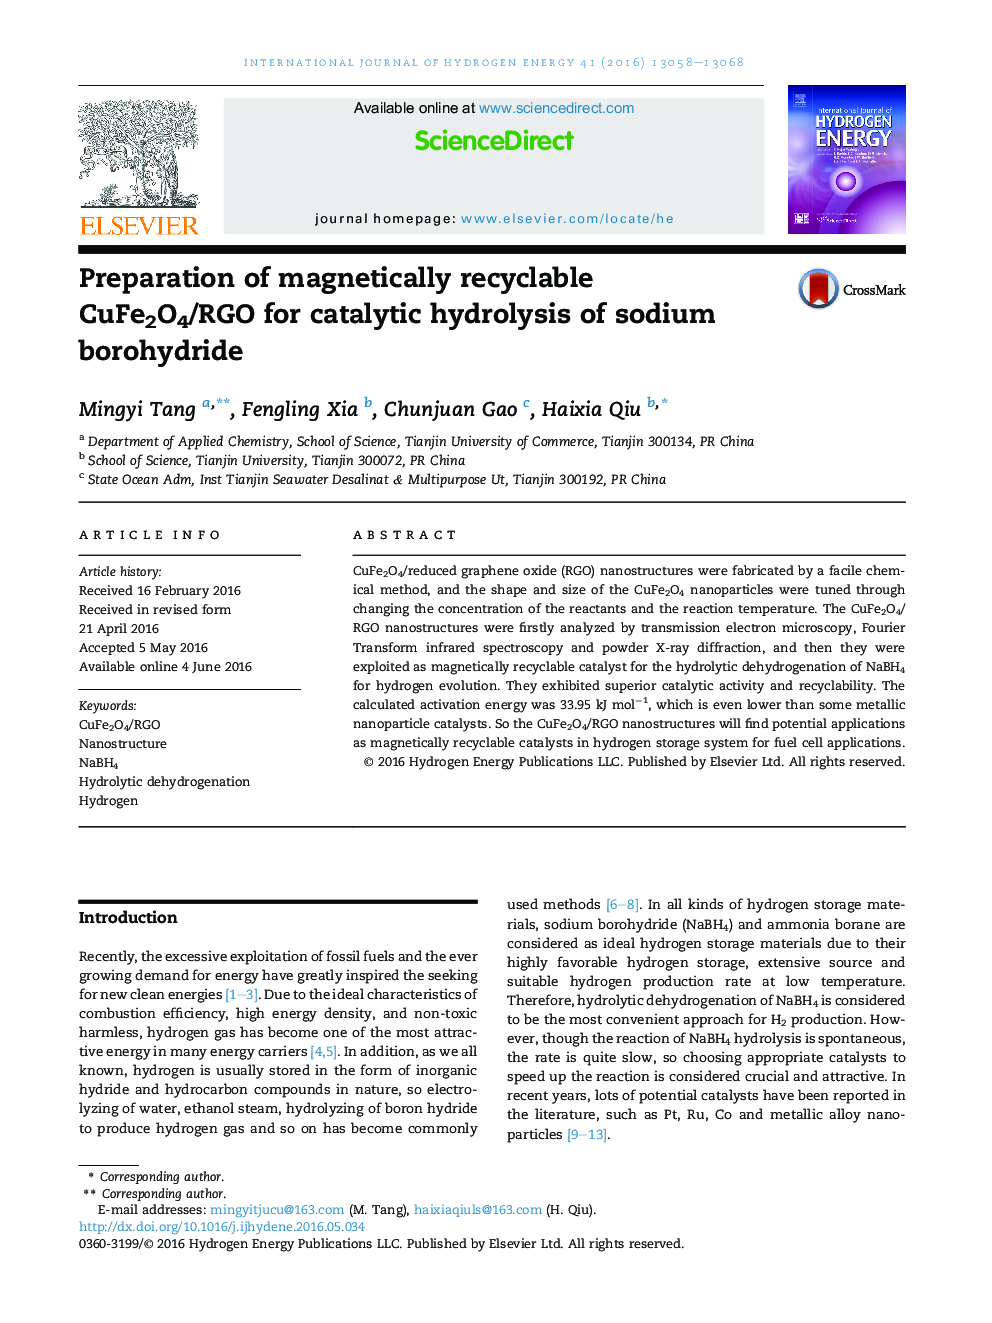 Preparation of magnetically recyclable CuFe2O4/RGO for catalytic hydrolysis of sodium borohydride